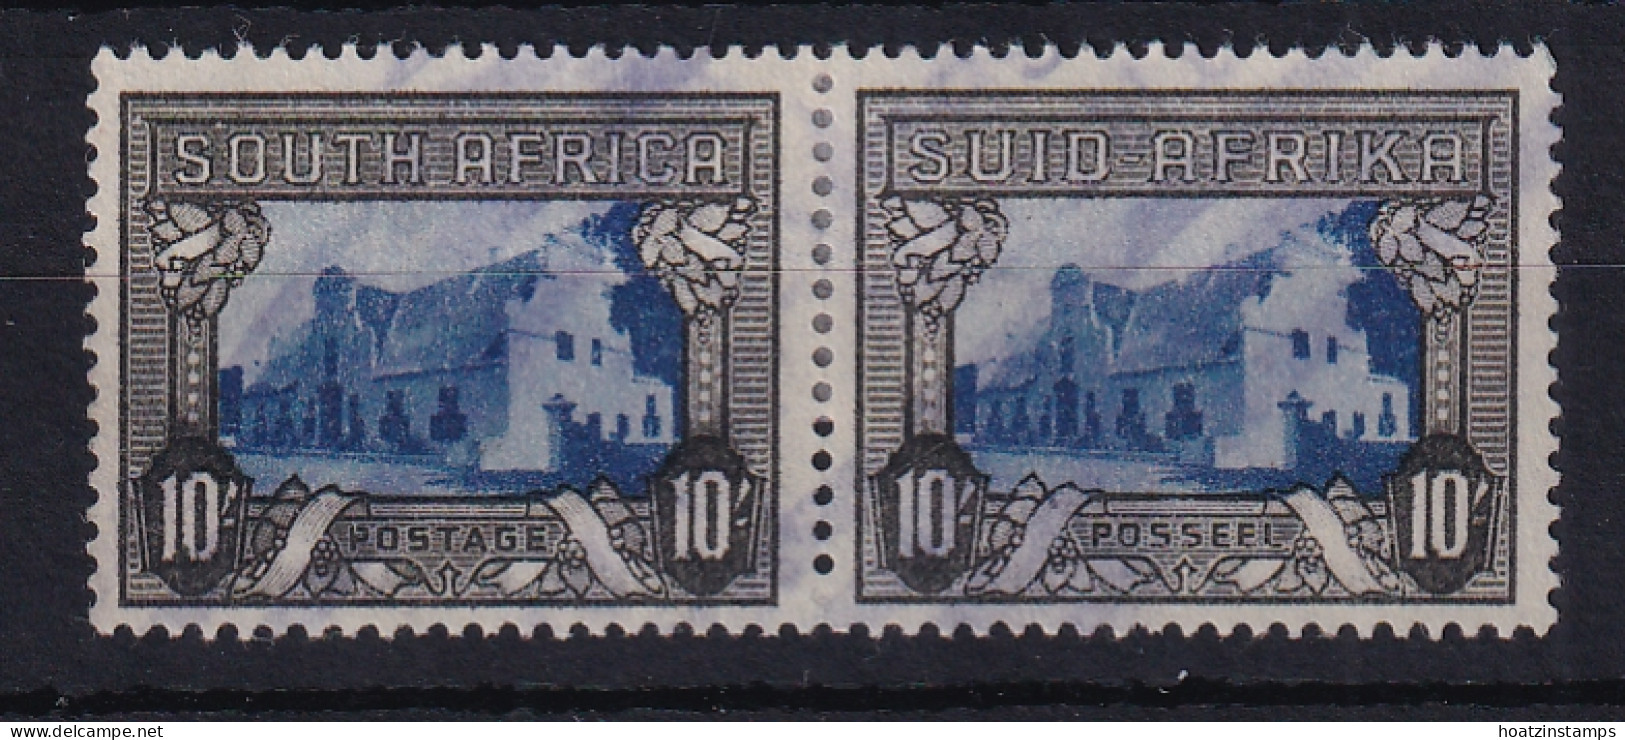 South Africa: 1933/48   Groot Constantia    SG64ca    10/-   Blue & Charcoal    Used Pair - Gebraucht